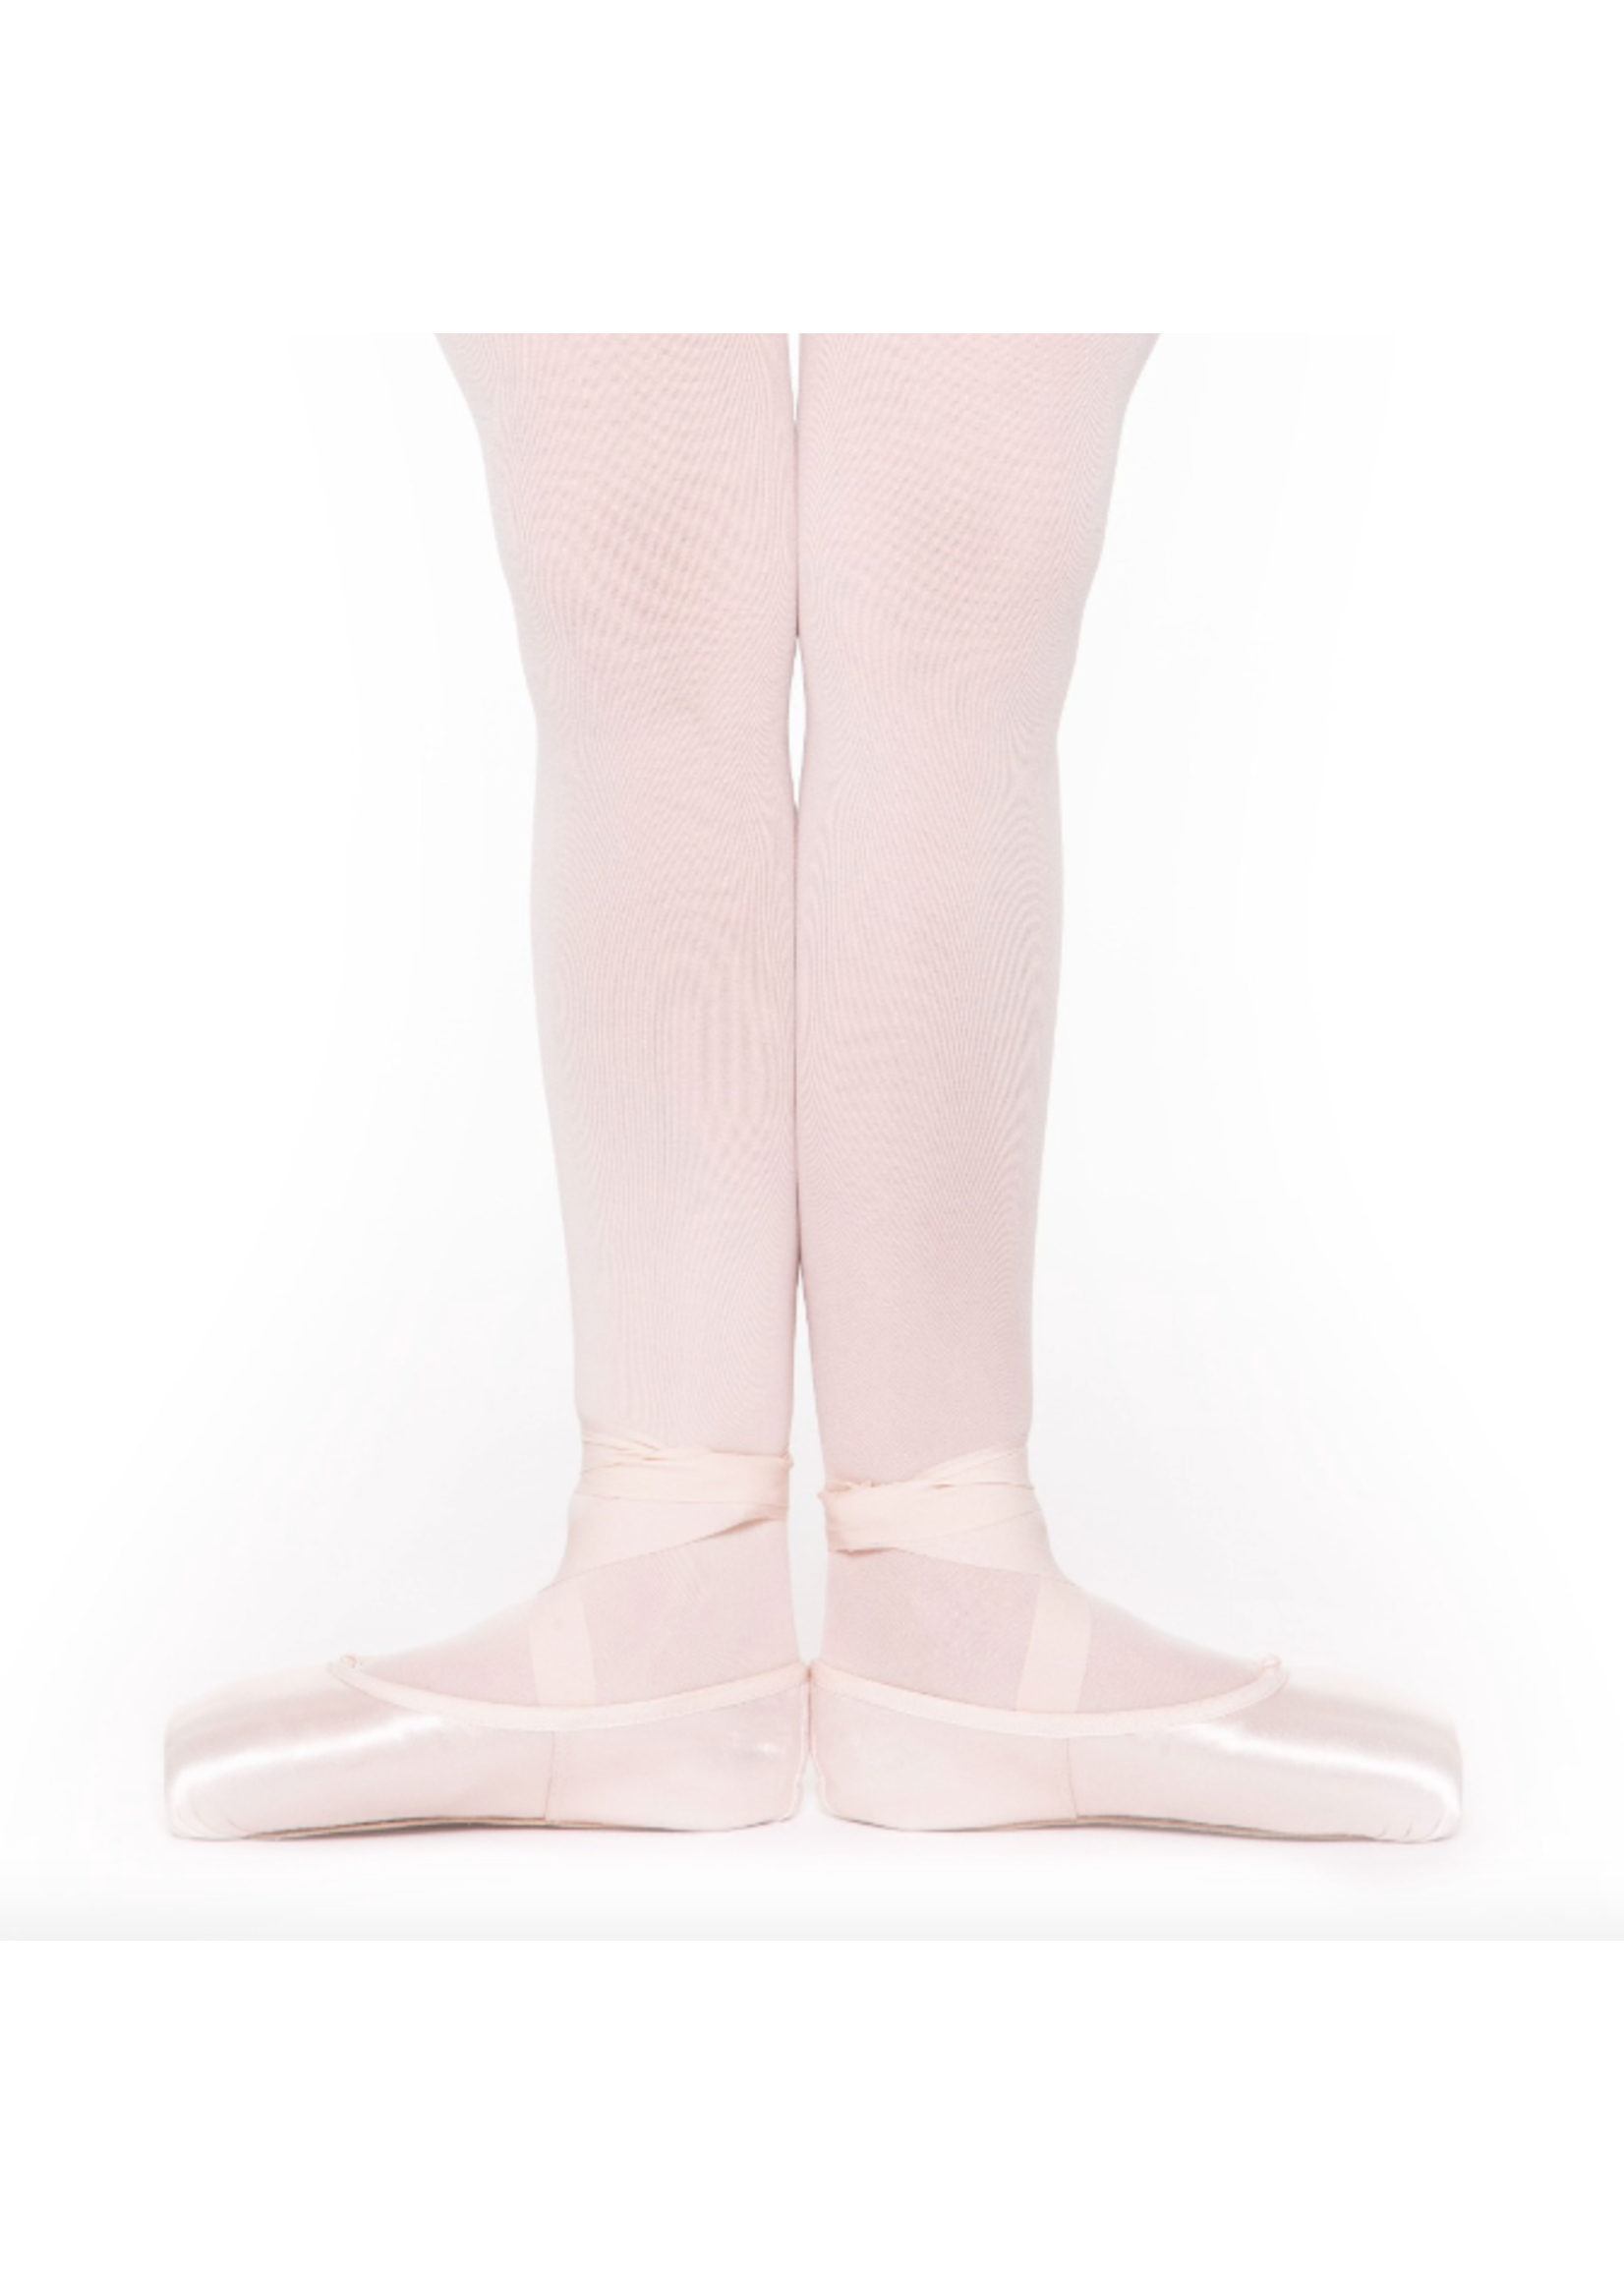 SEA OF PEARLS MABE v2 RP  POINTE SHOE